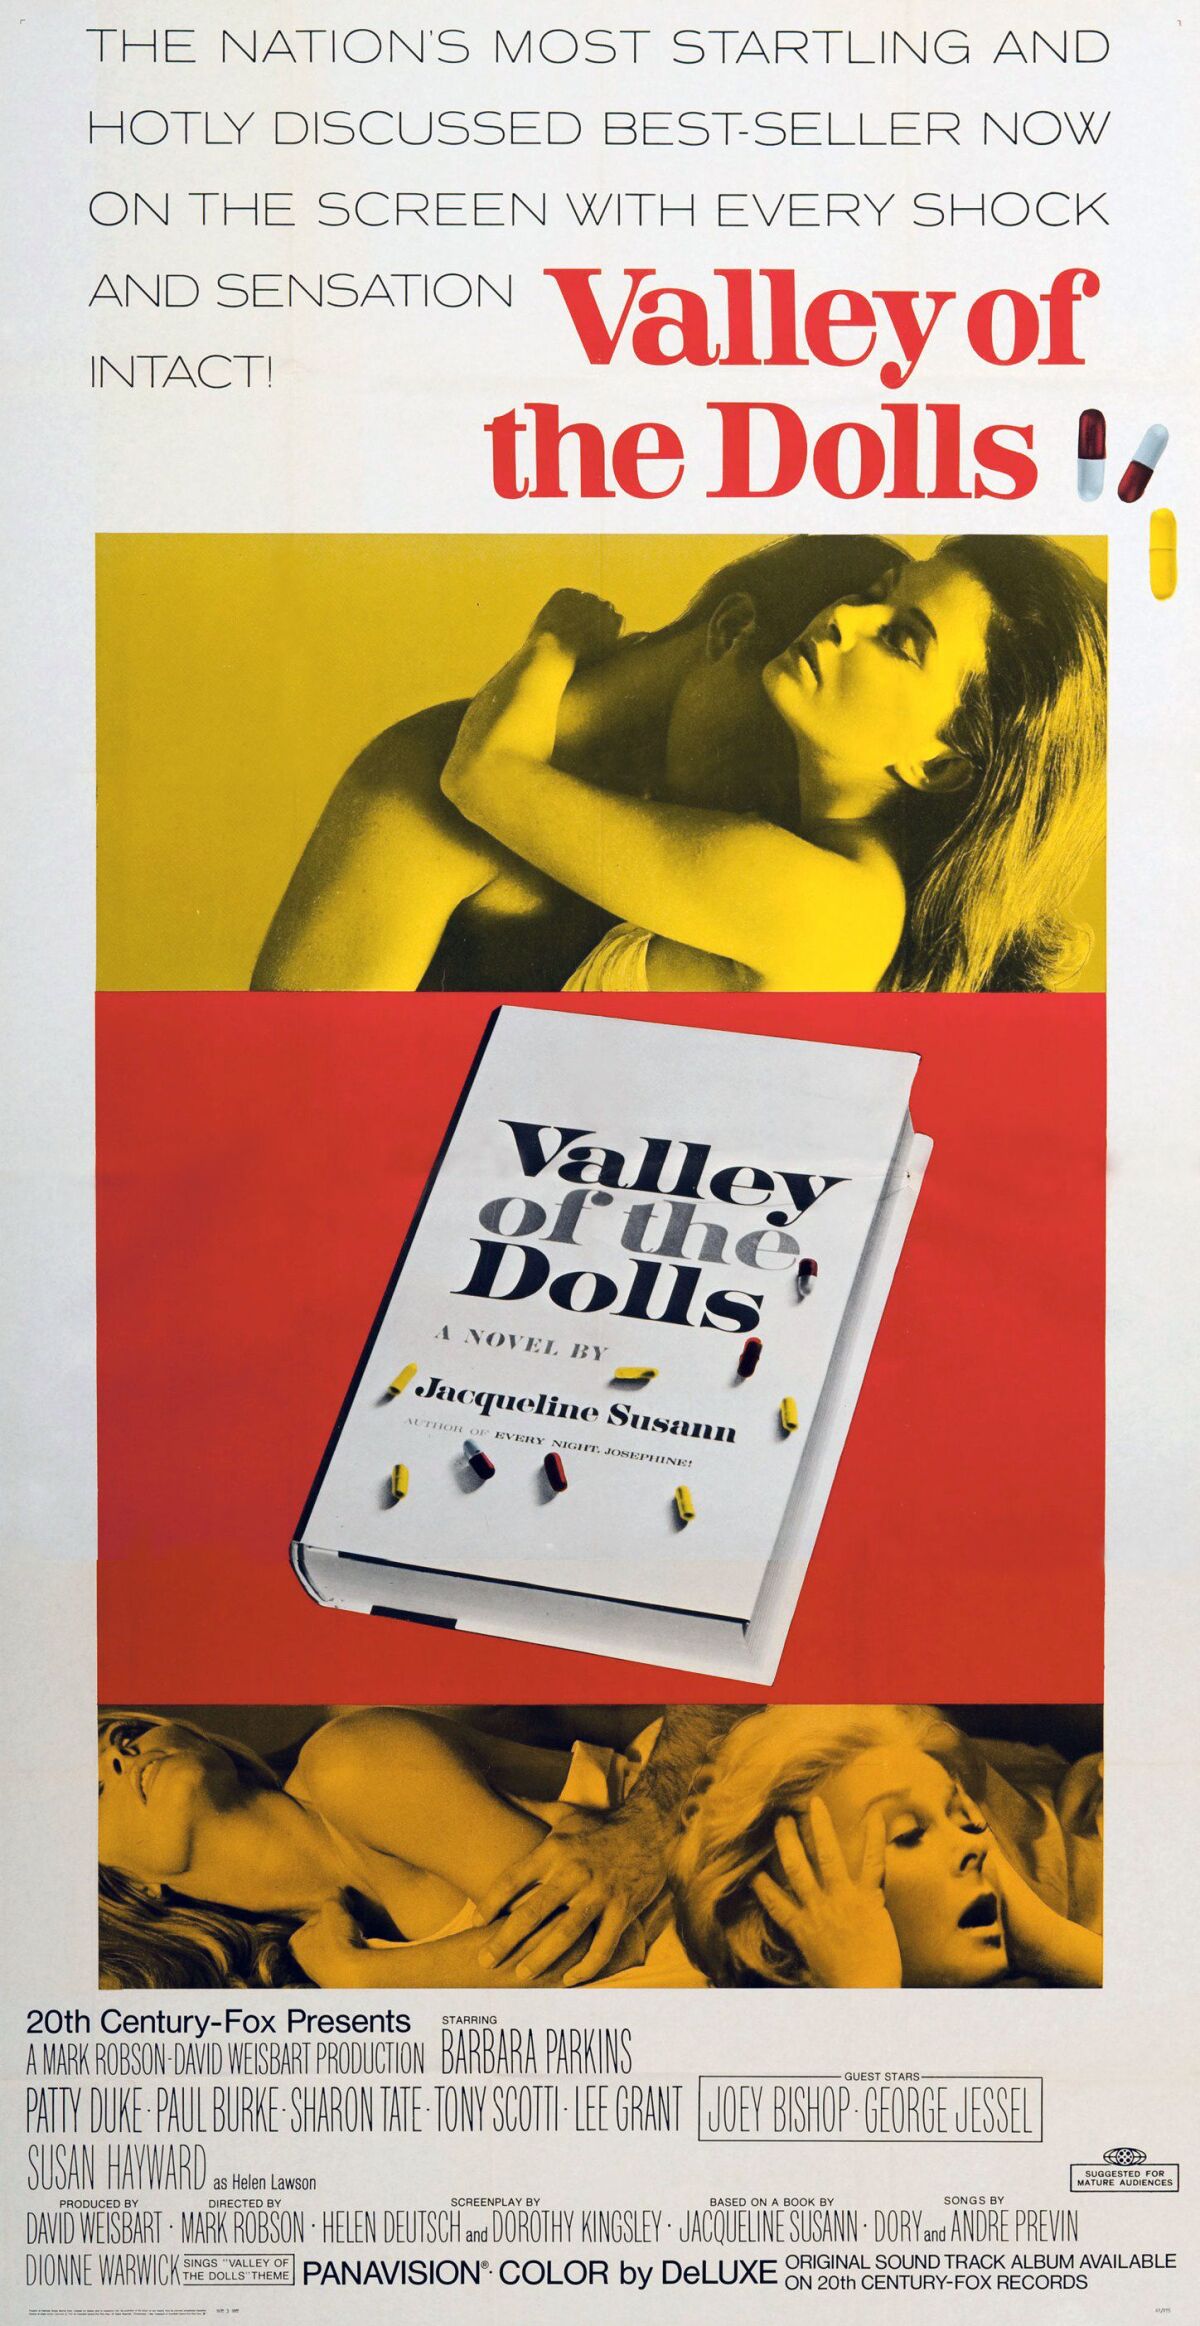 Movie poster promoting the film “Valley Of The Dolls.”